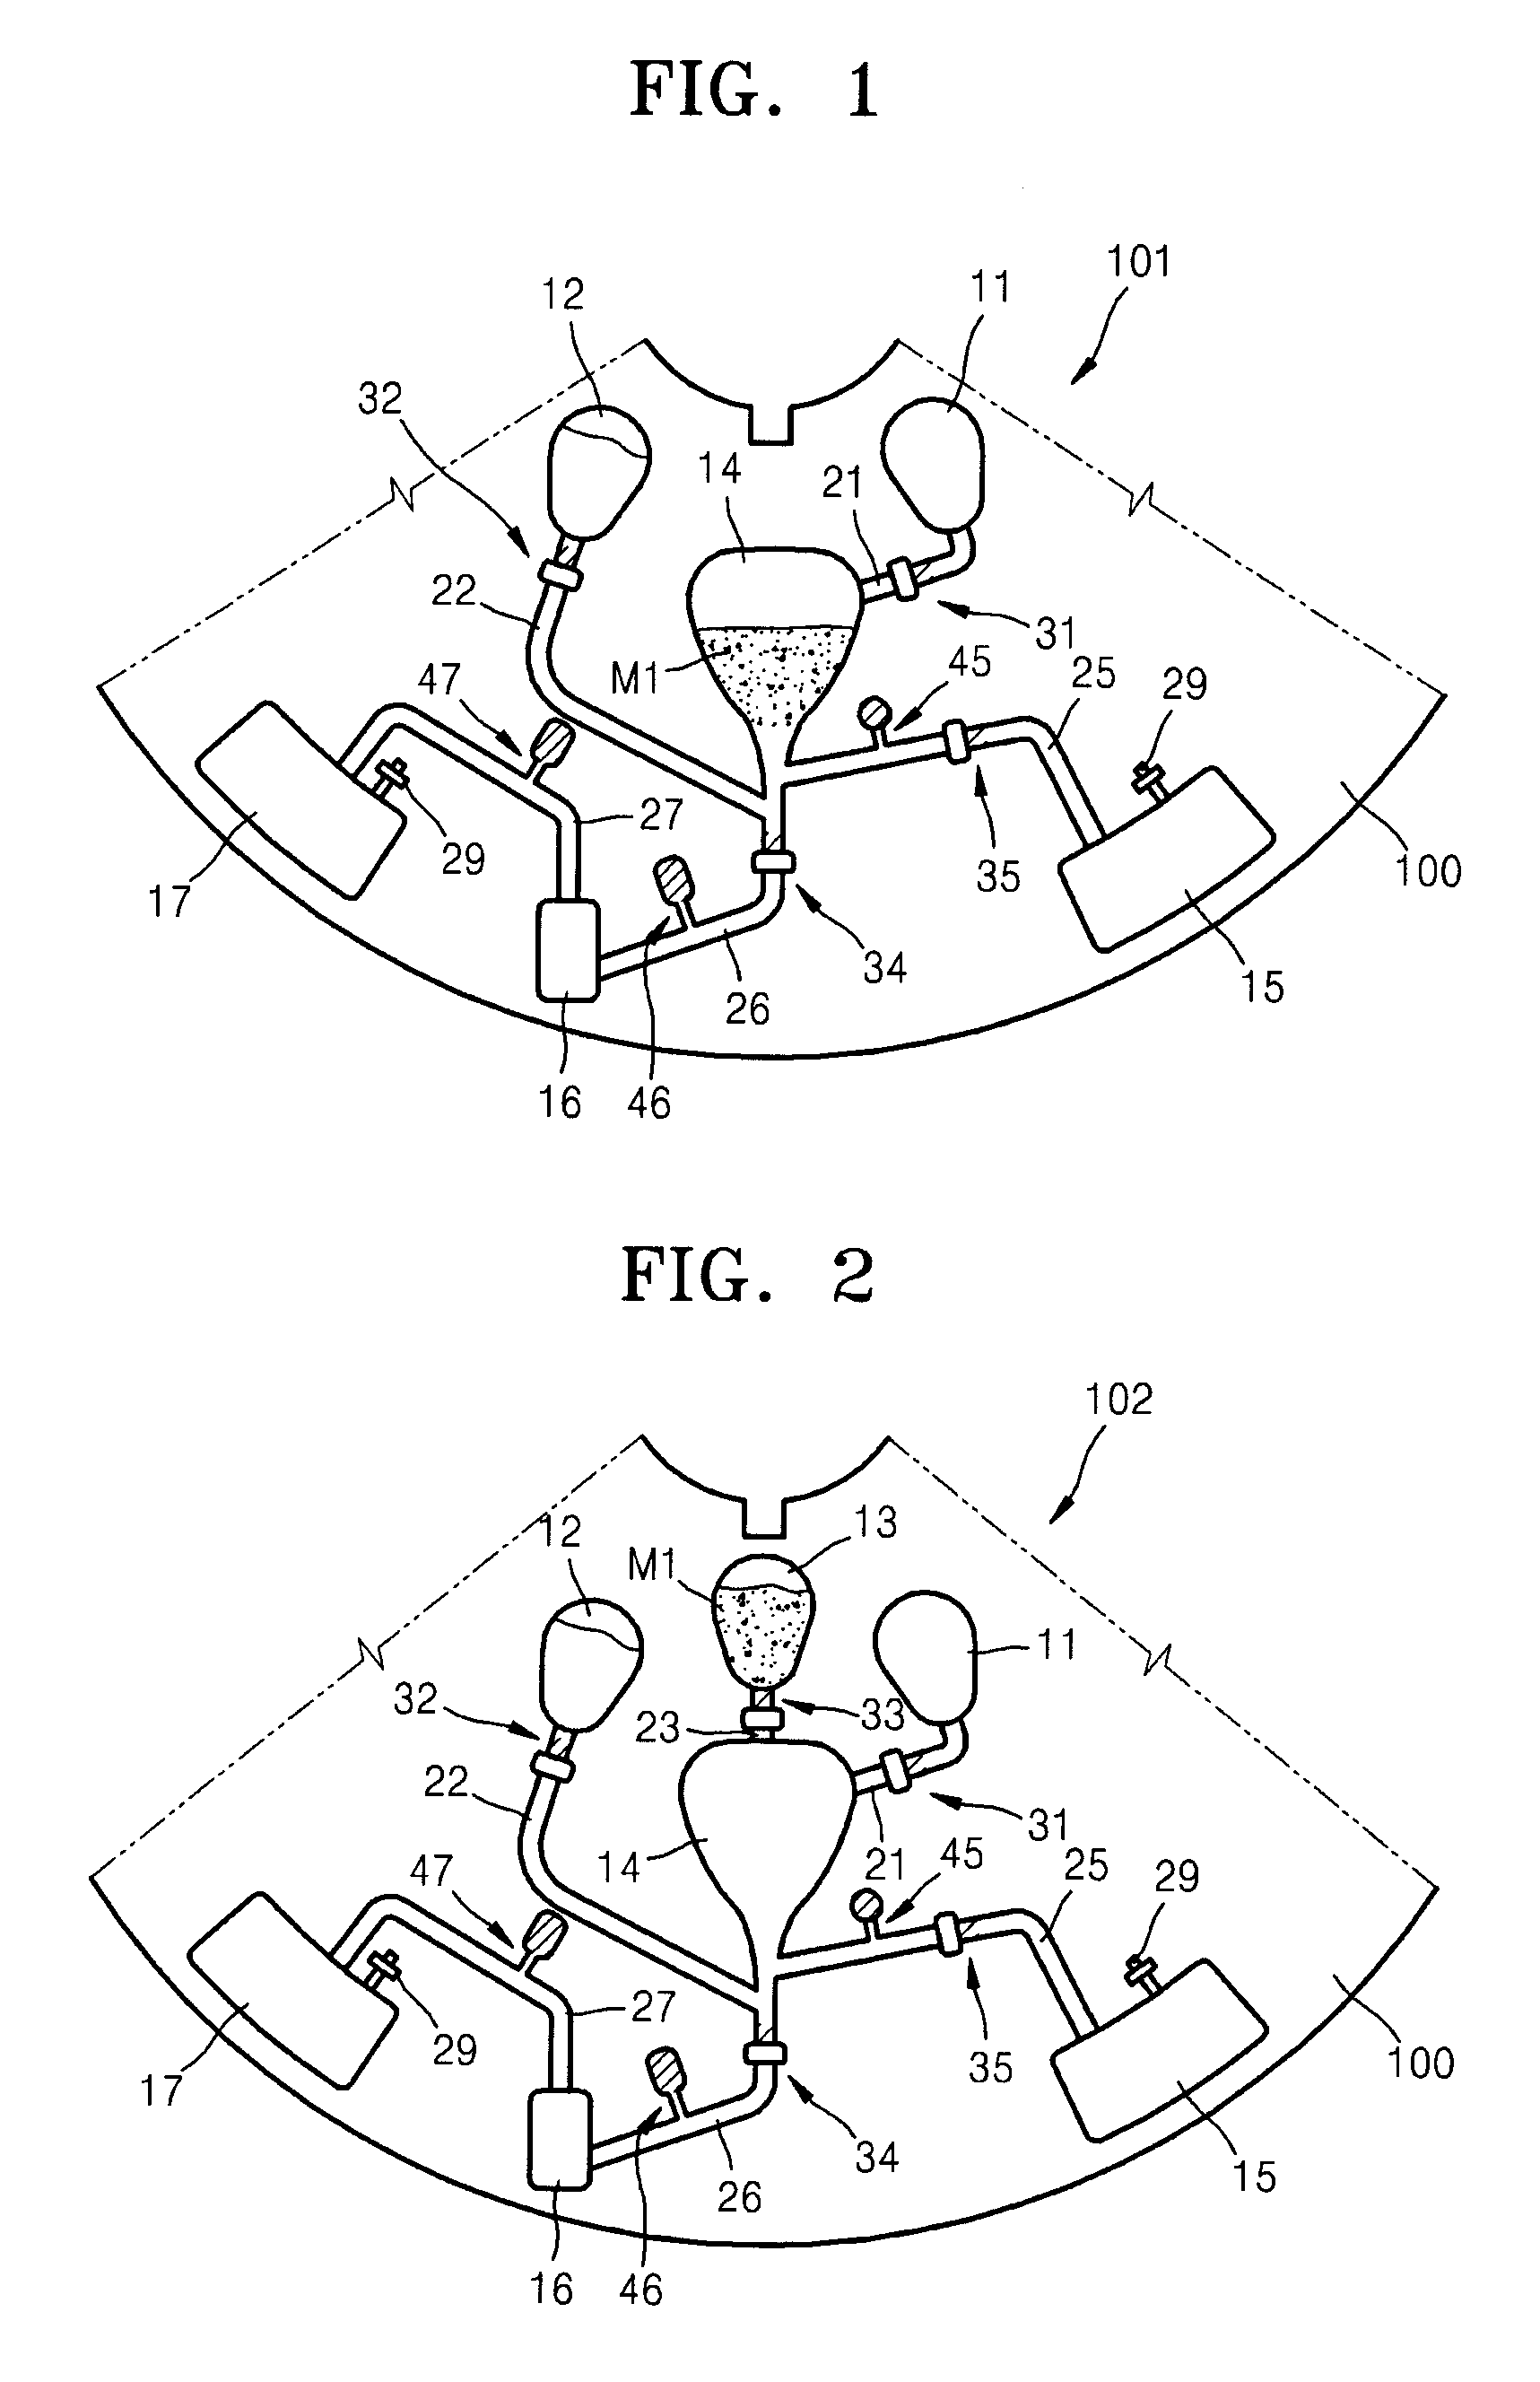 Centrifugal force-based microfluidic device for nucleic acid extraction and microfluidic system including the microfluidic device